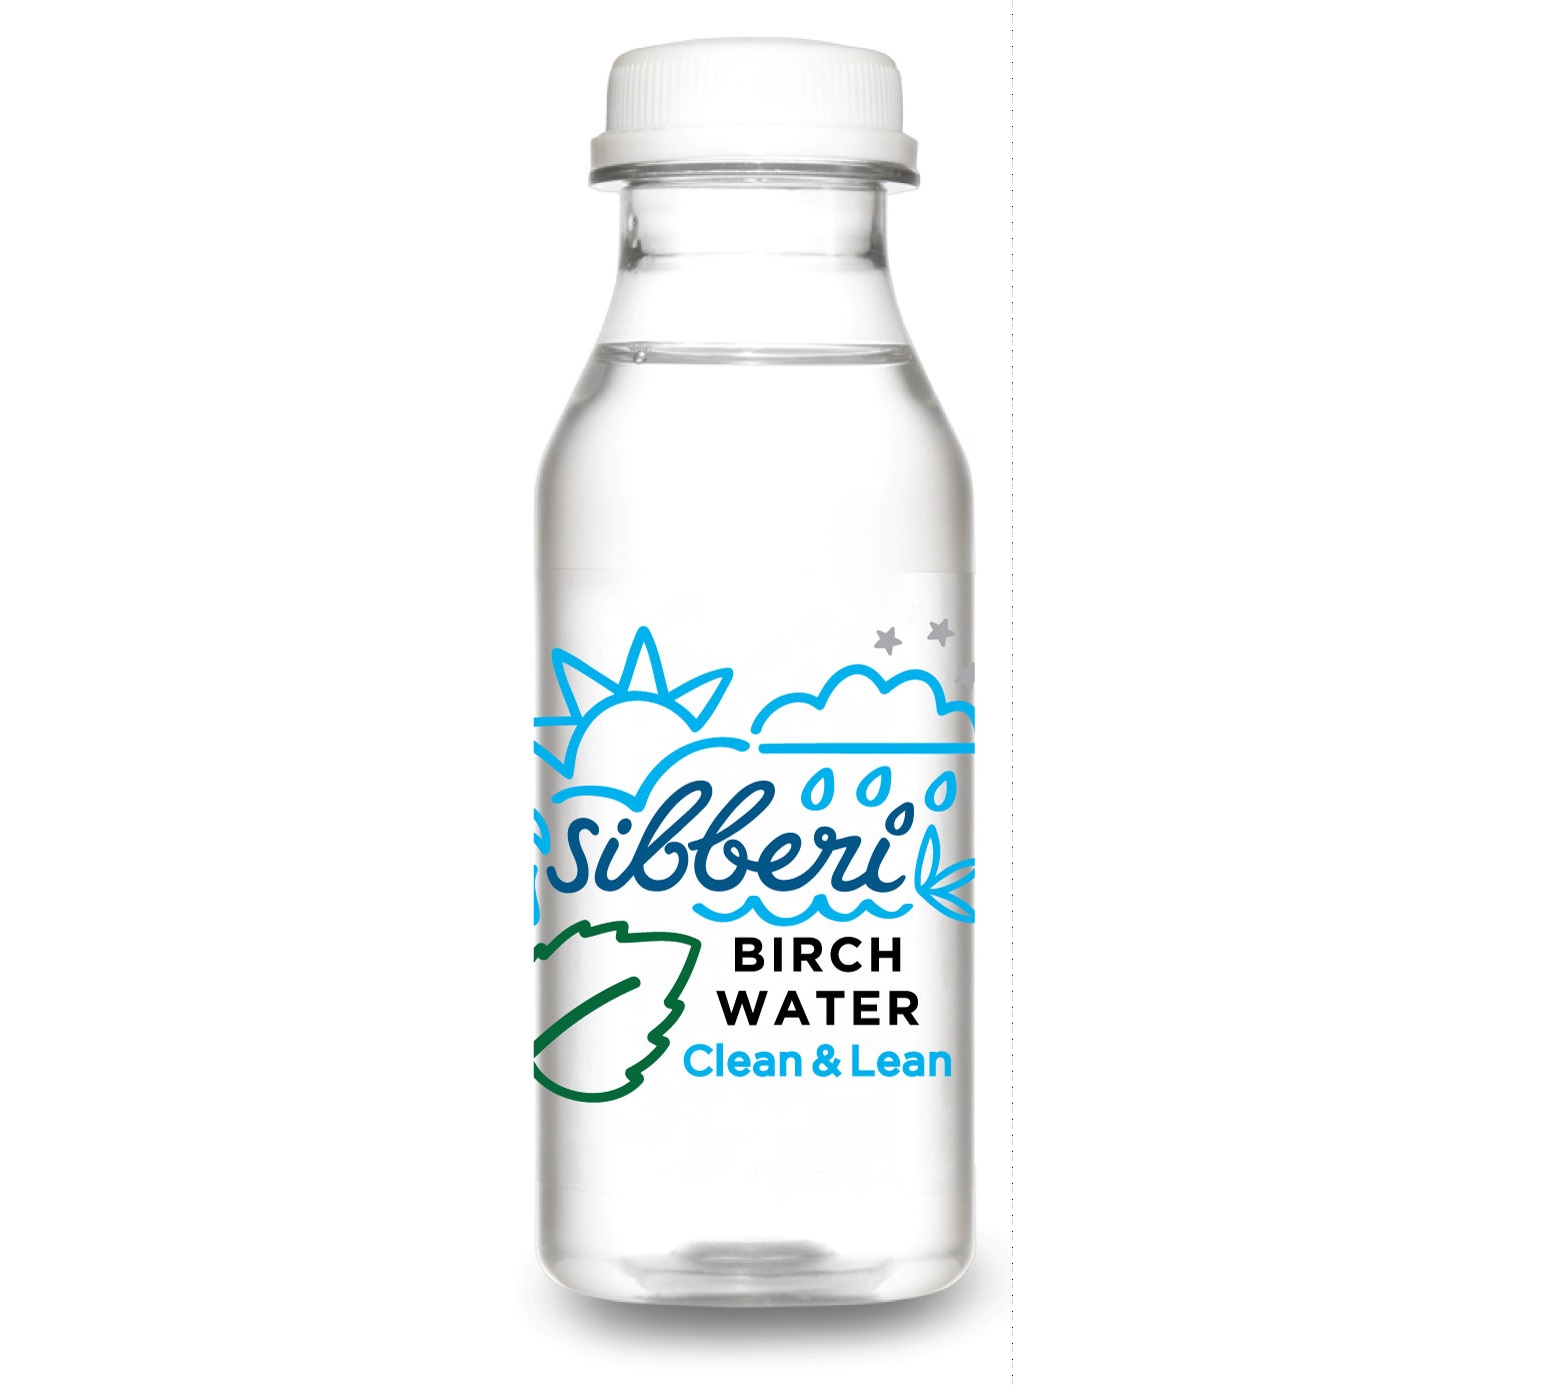 A global Estonian family markets birch water to the world